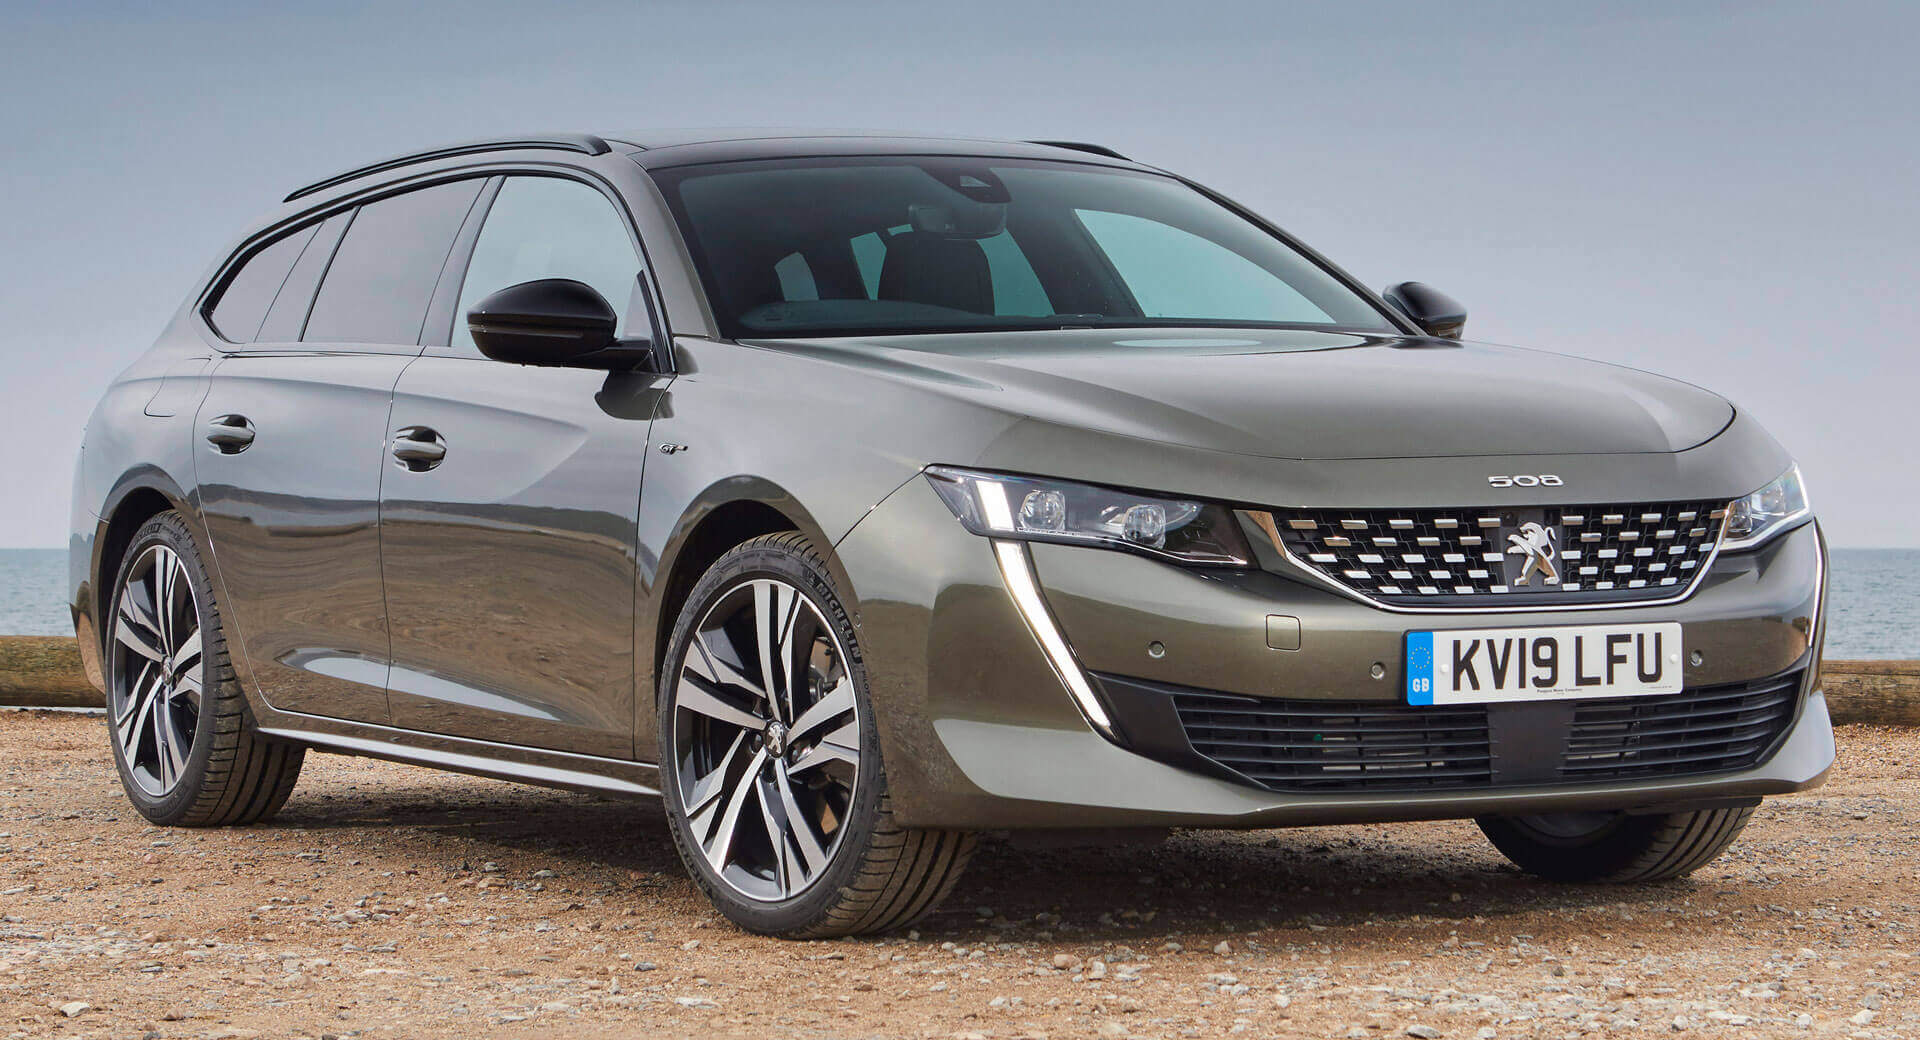 2019 Peugeot 508 SW On Sale In The UK In Four Grades